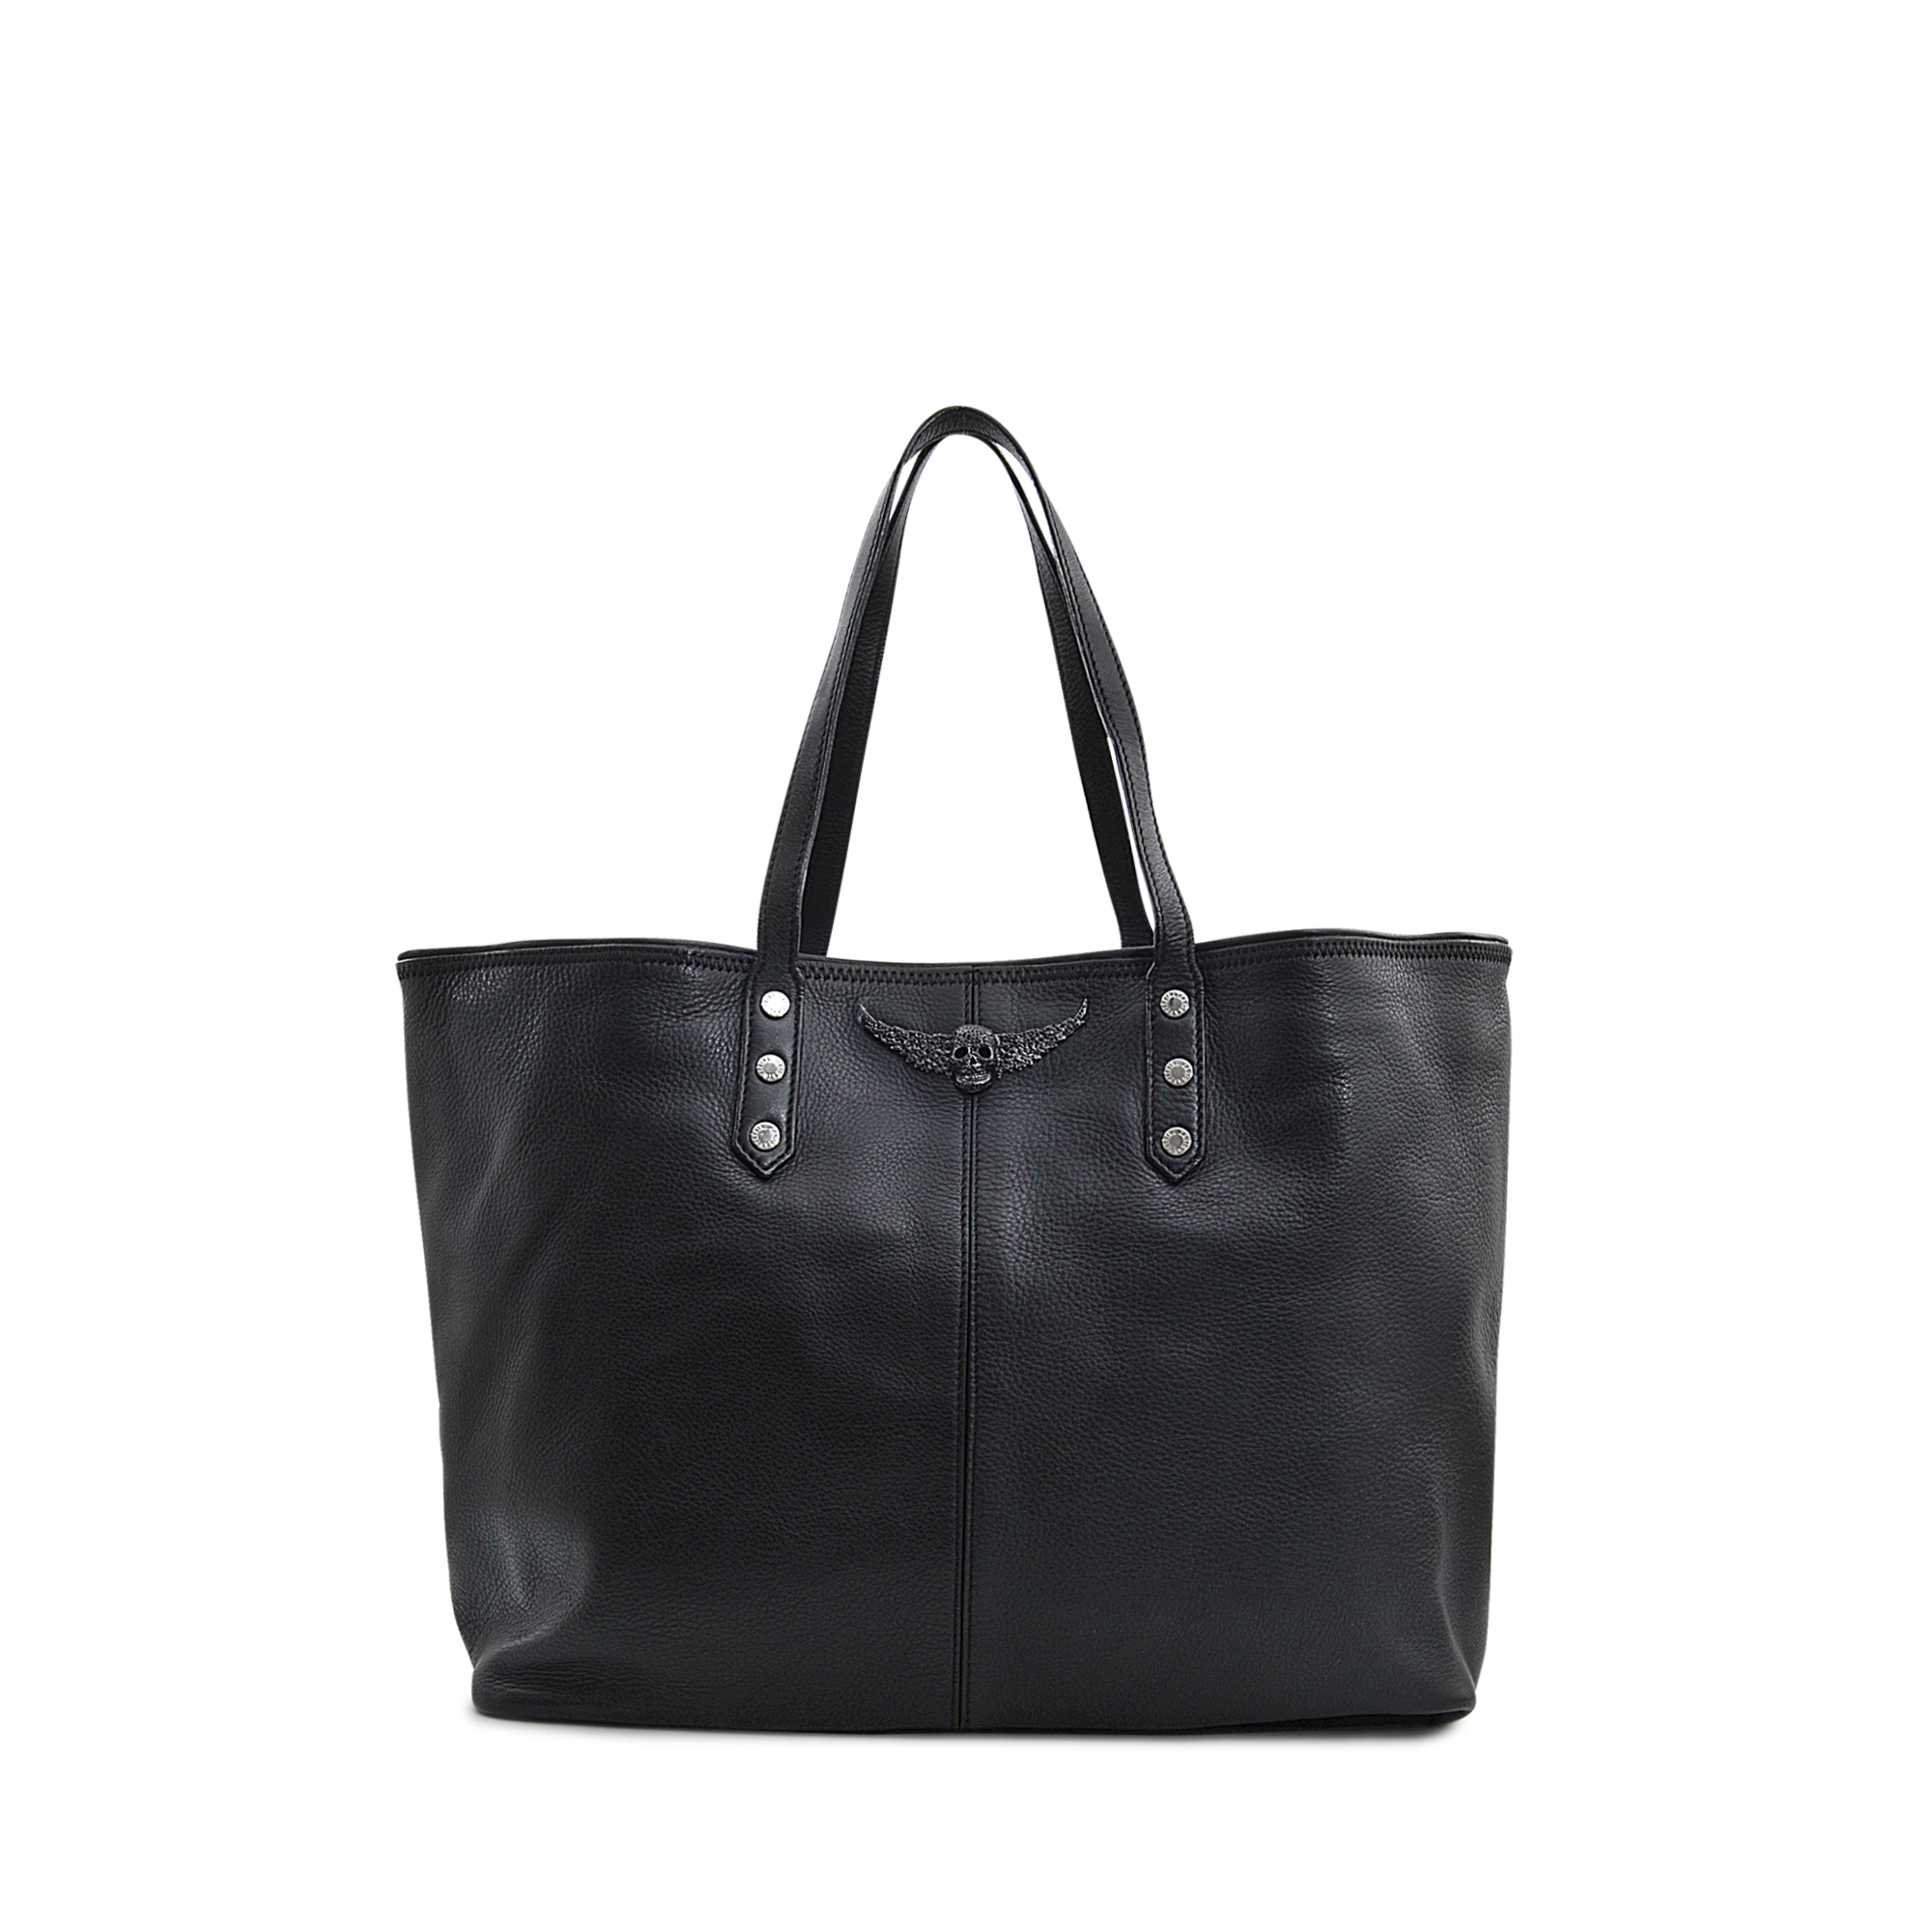 Zadig & Voltaire Mick Leather Tote in Black | Lyst